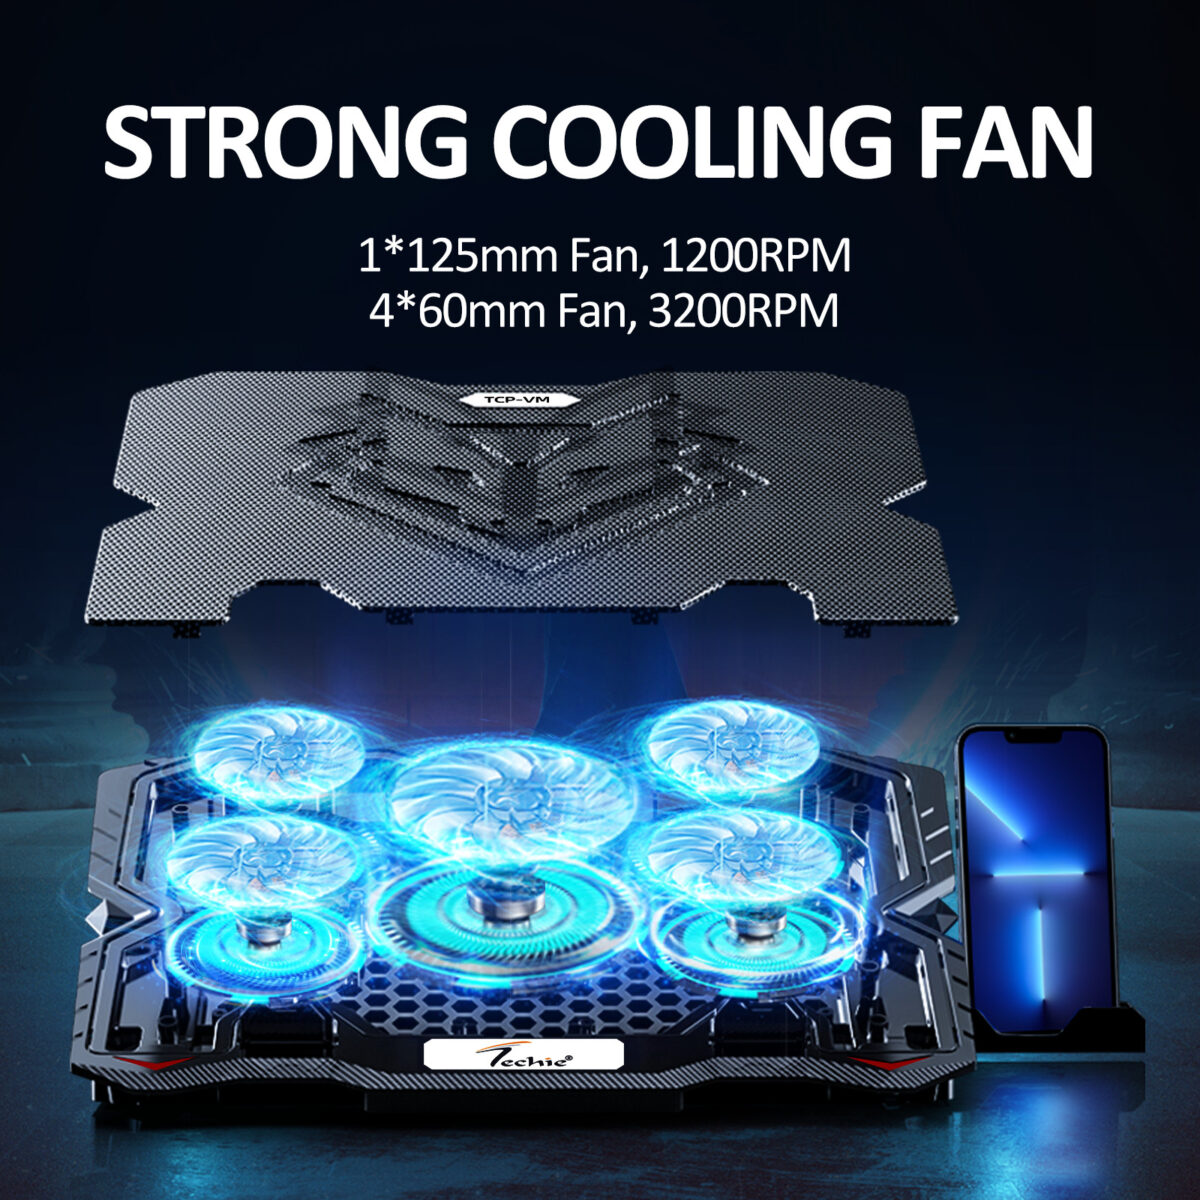 Techie 5 fan laptop cooling pad with Strong cooling fans